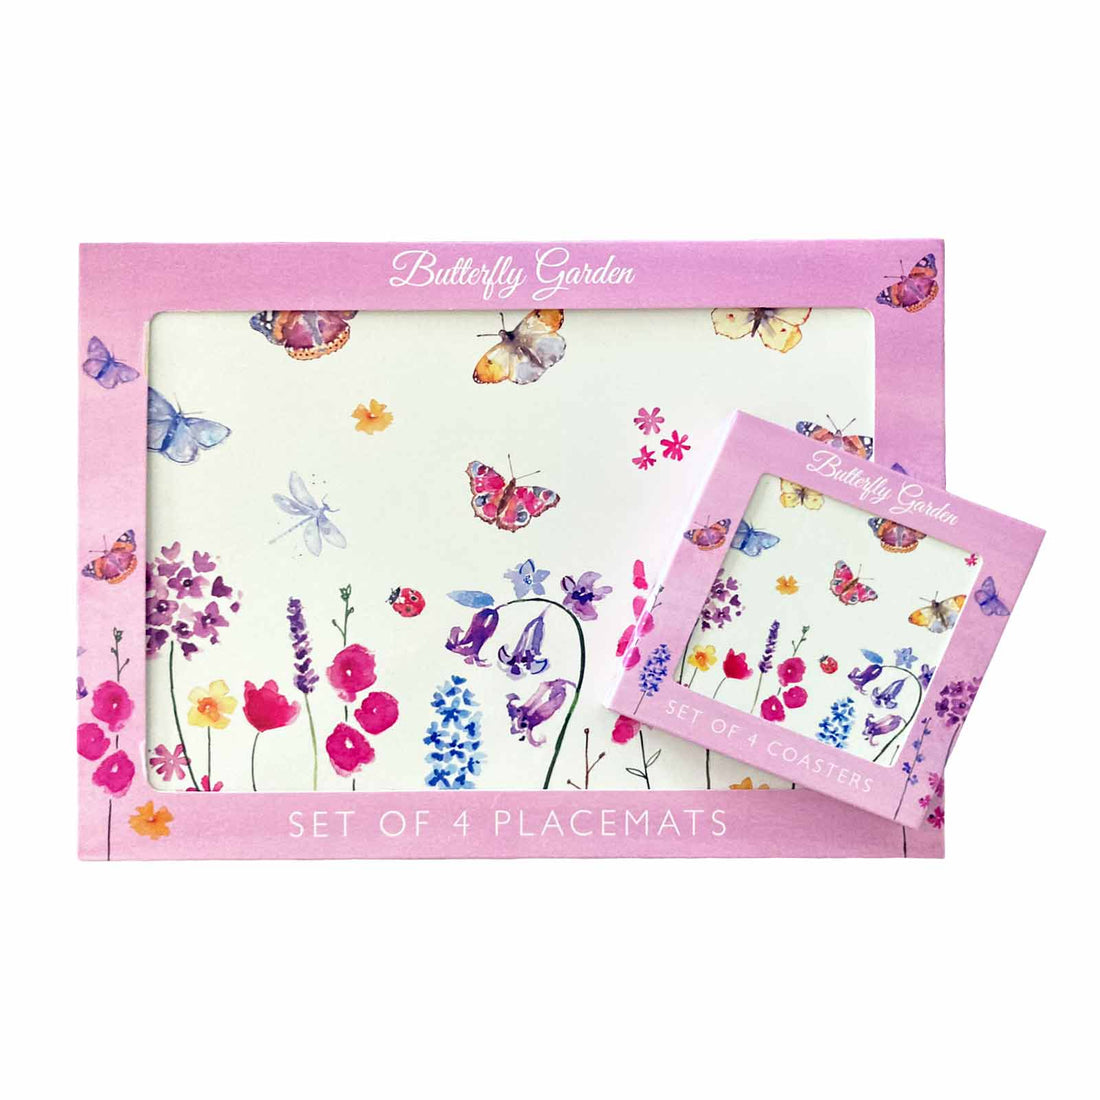 Butterfly Garden Placemats and Coasters Set of 4